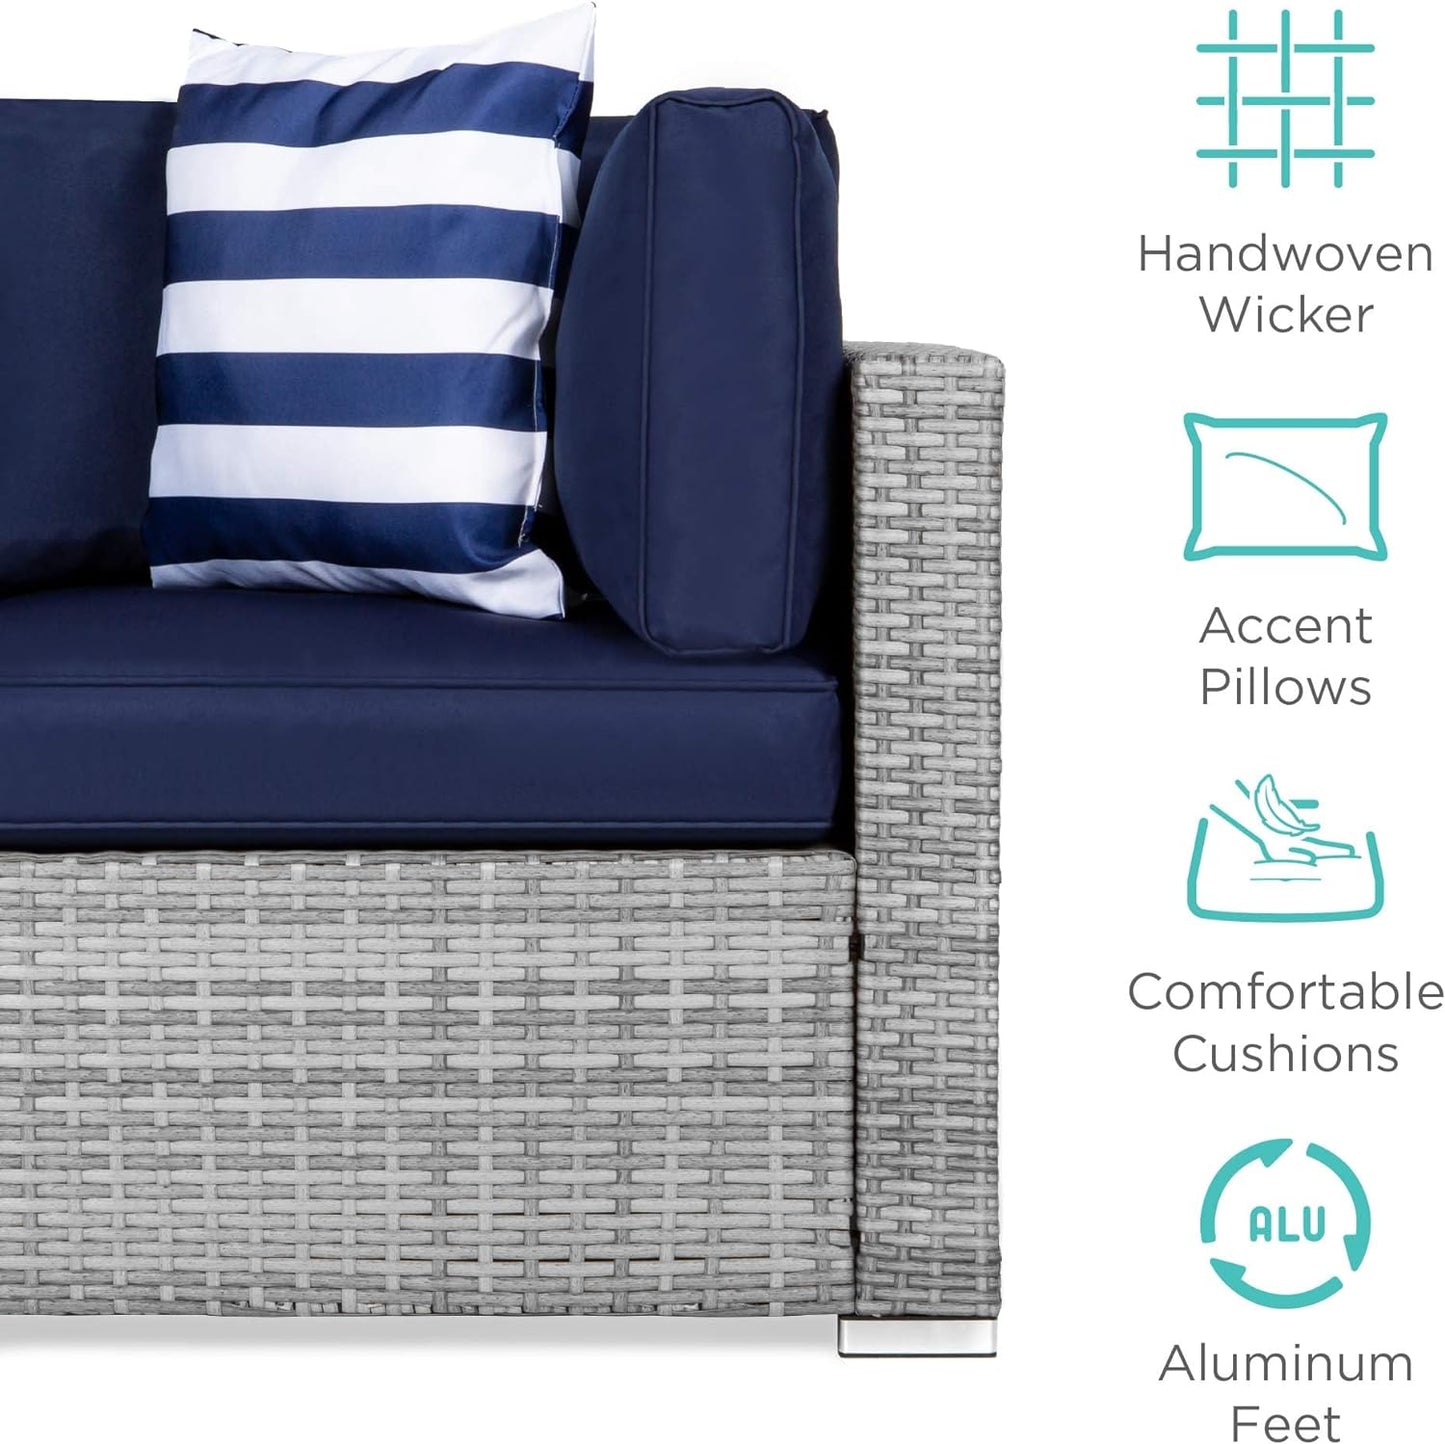 7-Piece Modular Outdoor Sectional Wicker Patio Conversation Set W/ 2 Pillows, Coffee Table, Cover Included - Gray/Navy - Design By Technique